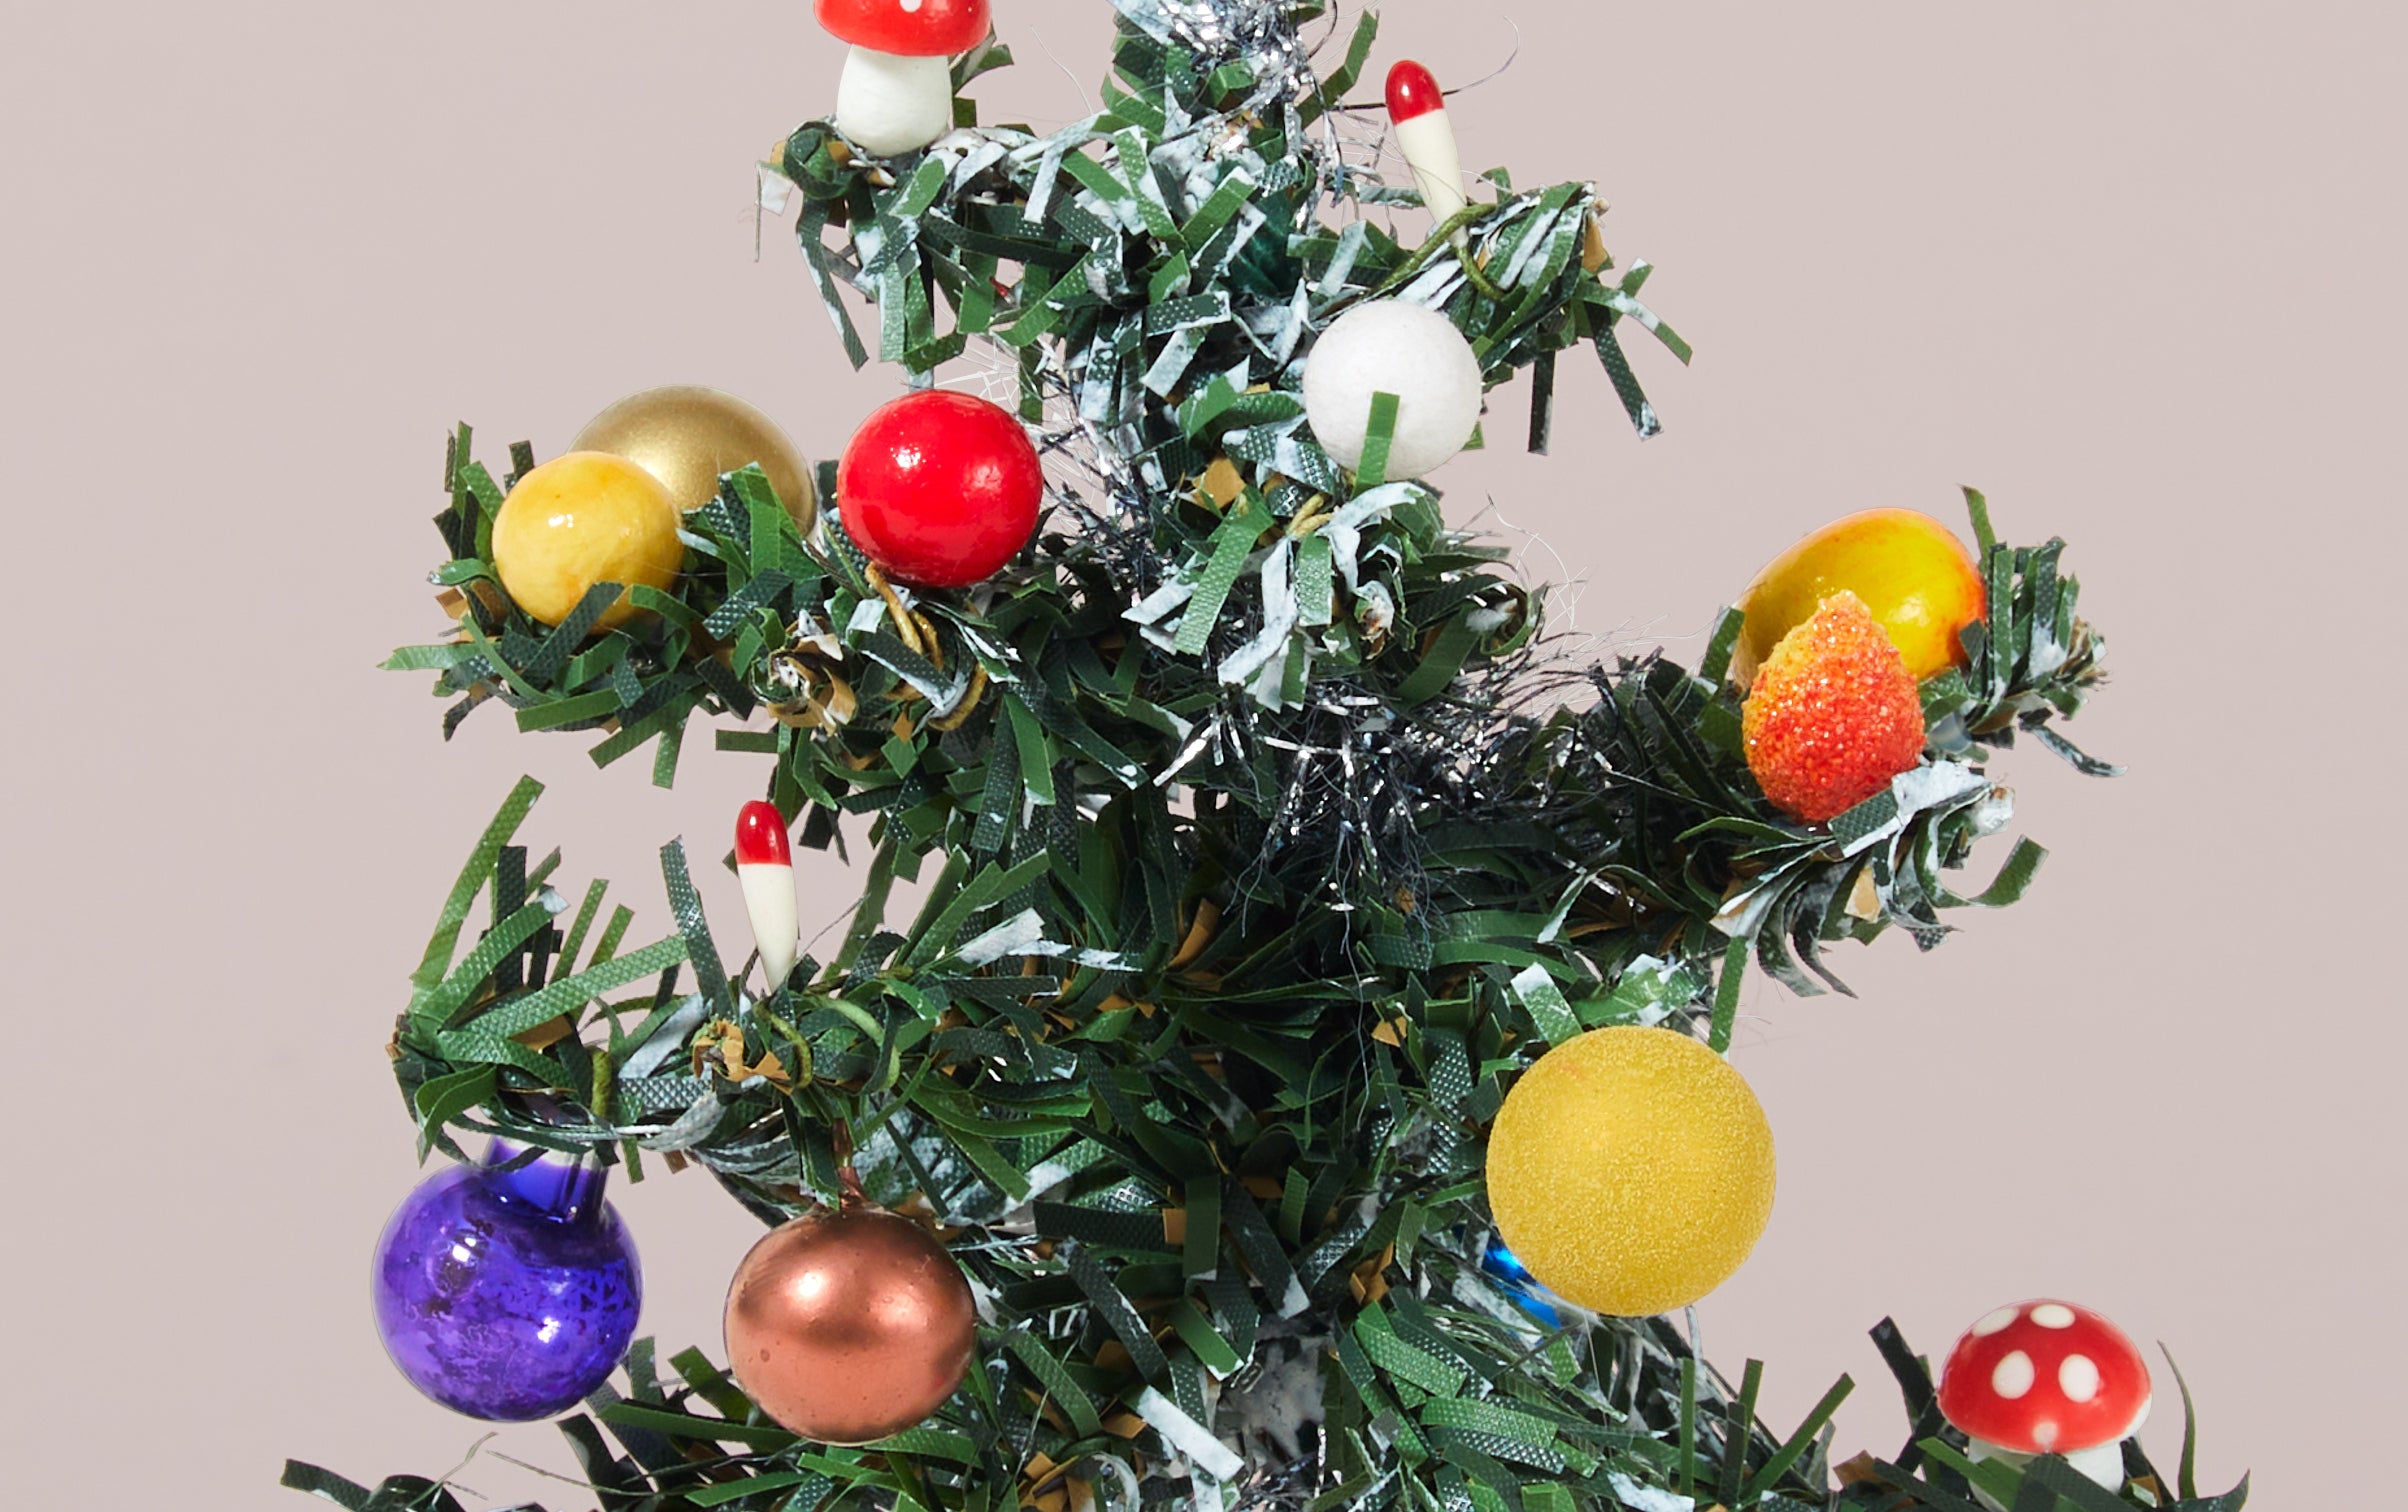 Mini Christmas Tree with Decorations